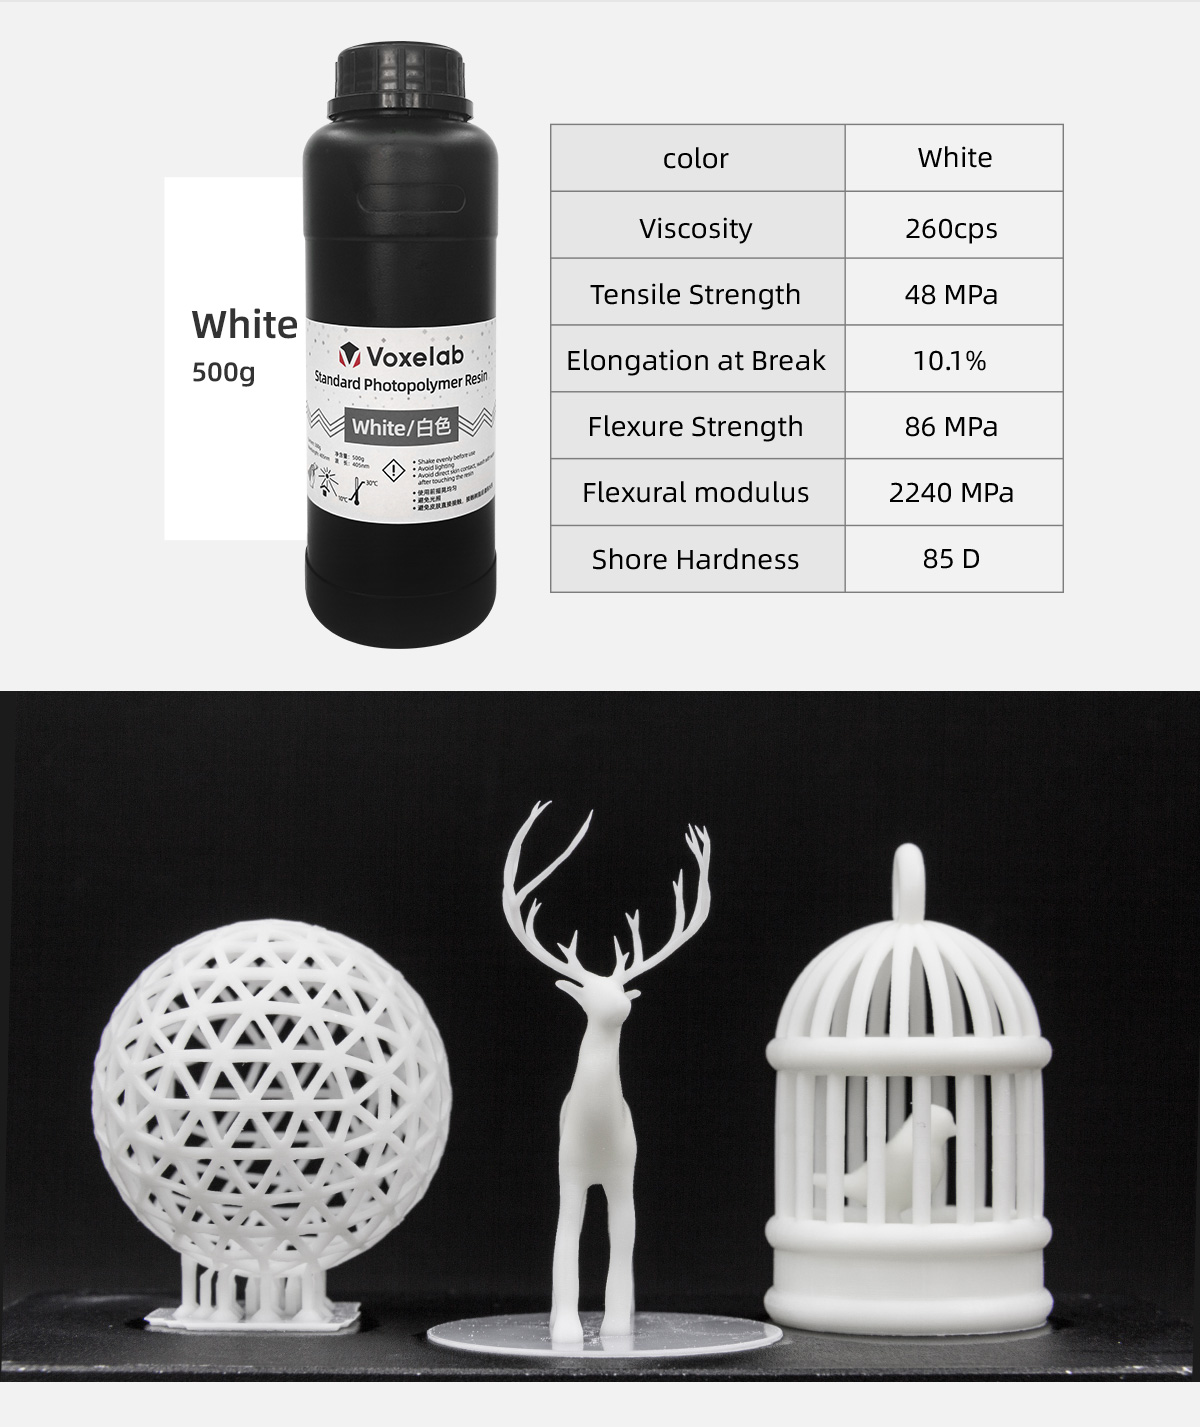 Inland High Precision Plant-Based PLA Resin Pro, Large Build Volume 3D  Printing UV-Curing Photopolymer Resin for 405nm LCD Monochrome (White, 1KG)